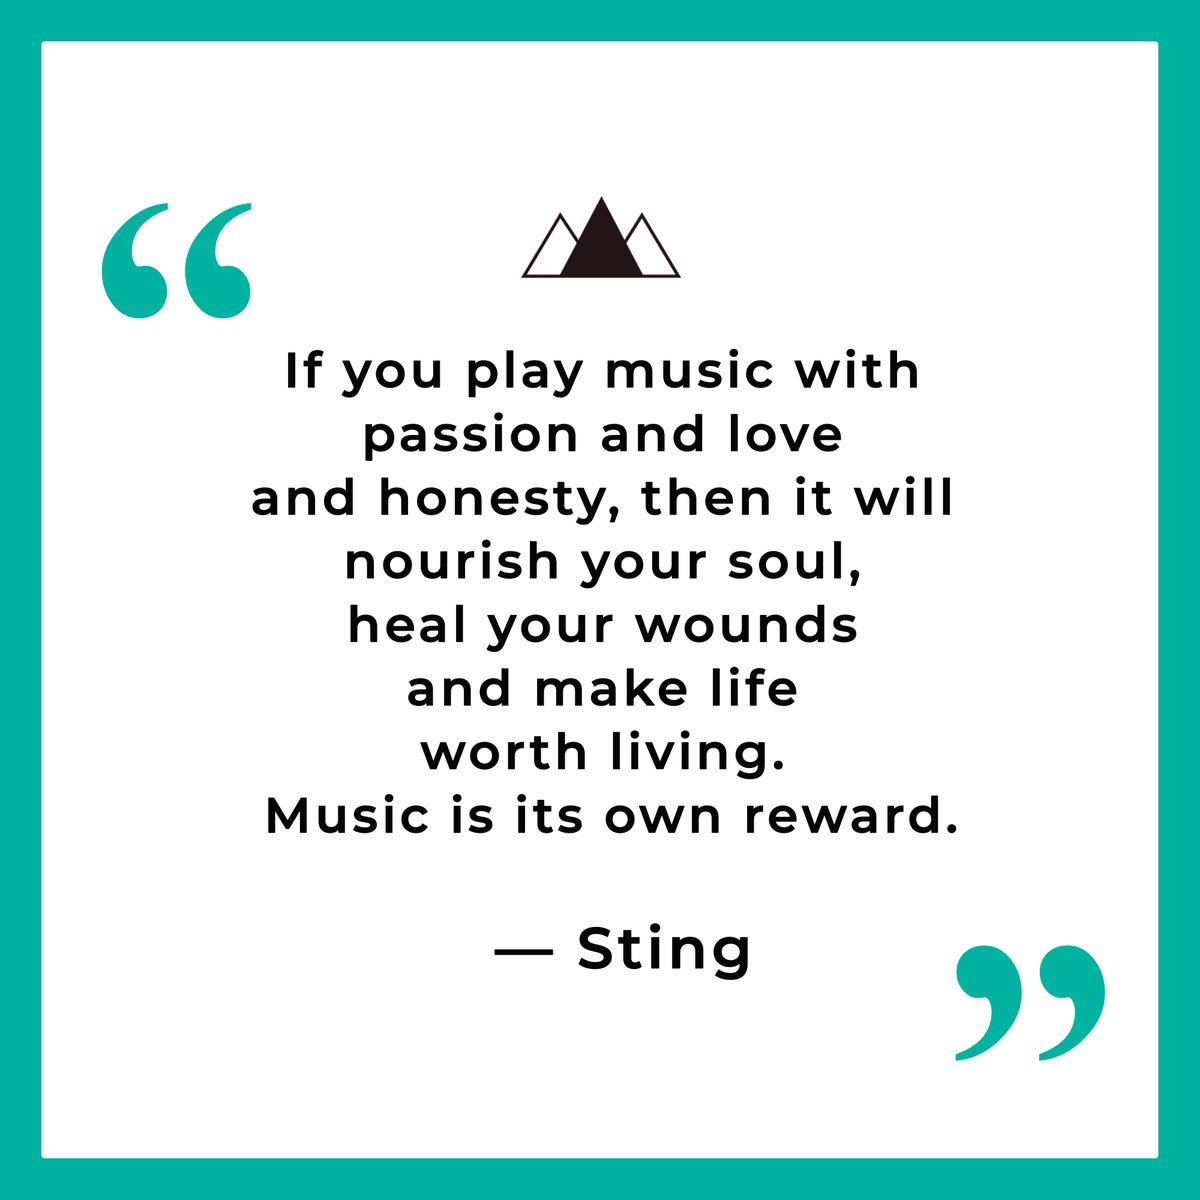 Inspiring words from Sting!

#musicquotes #musicinspiration #musicbusiness #musiclove #famousquotes #Sting #ThePolice